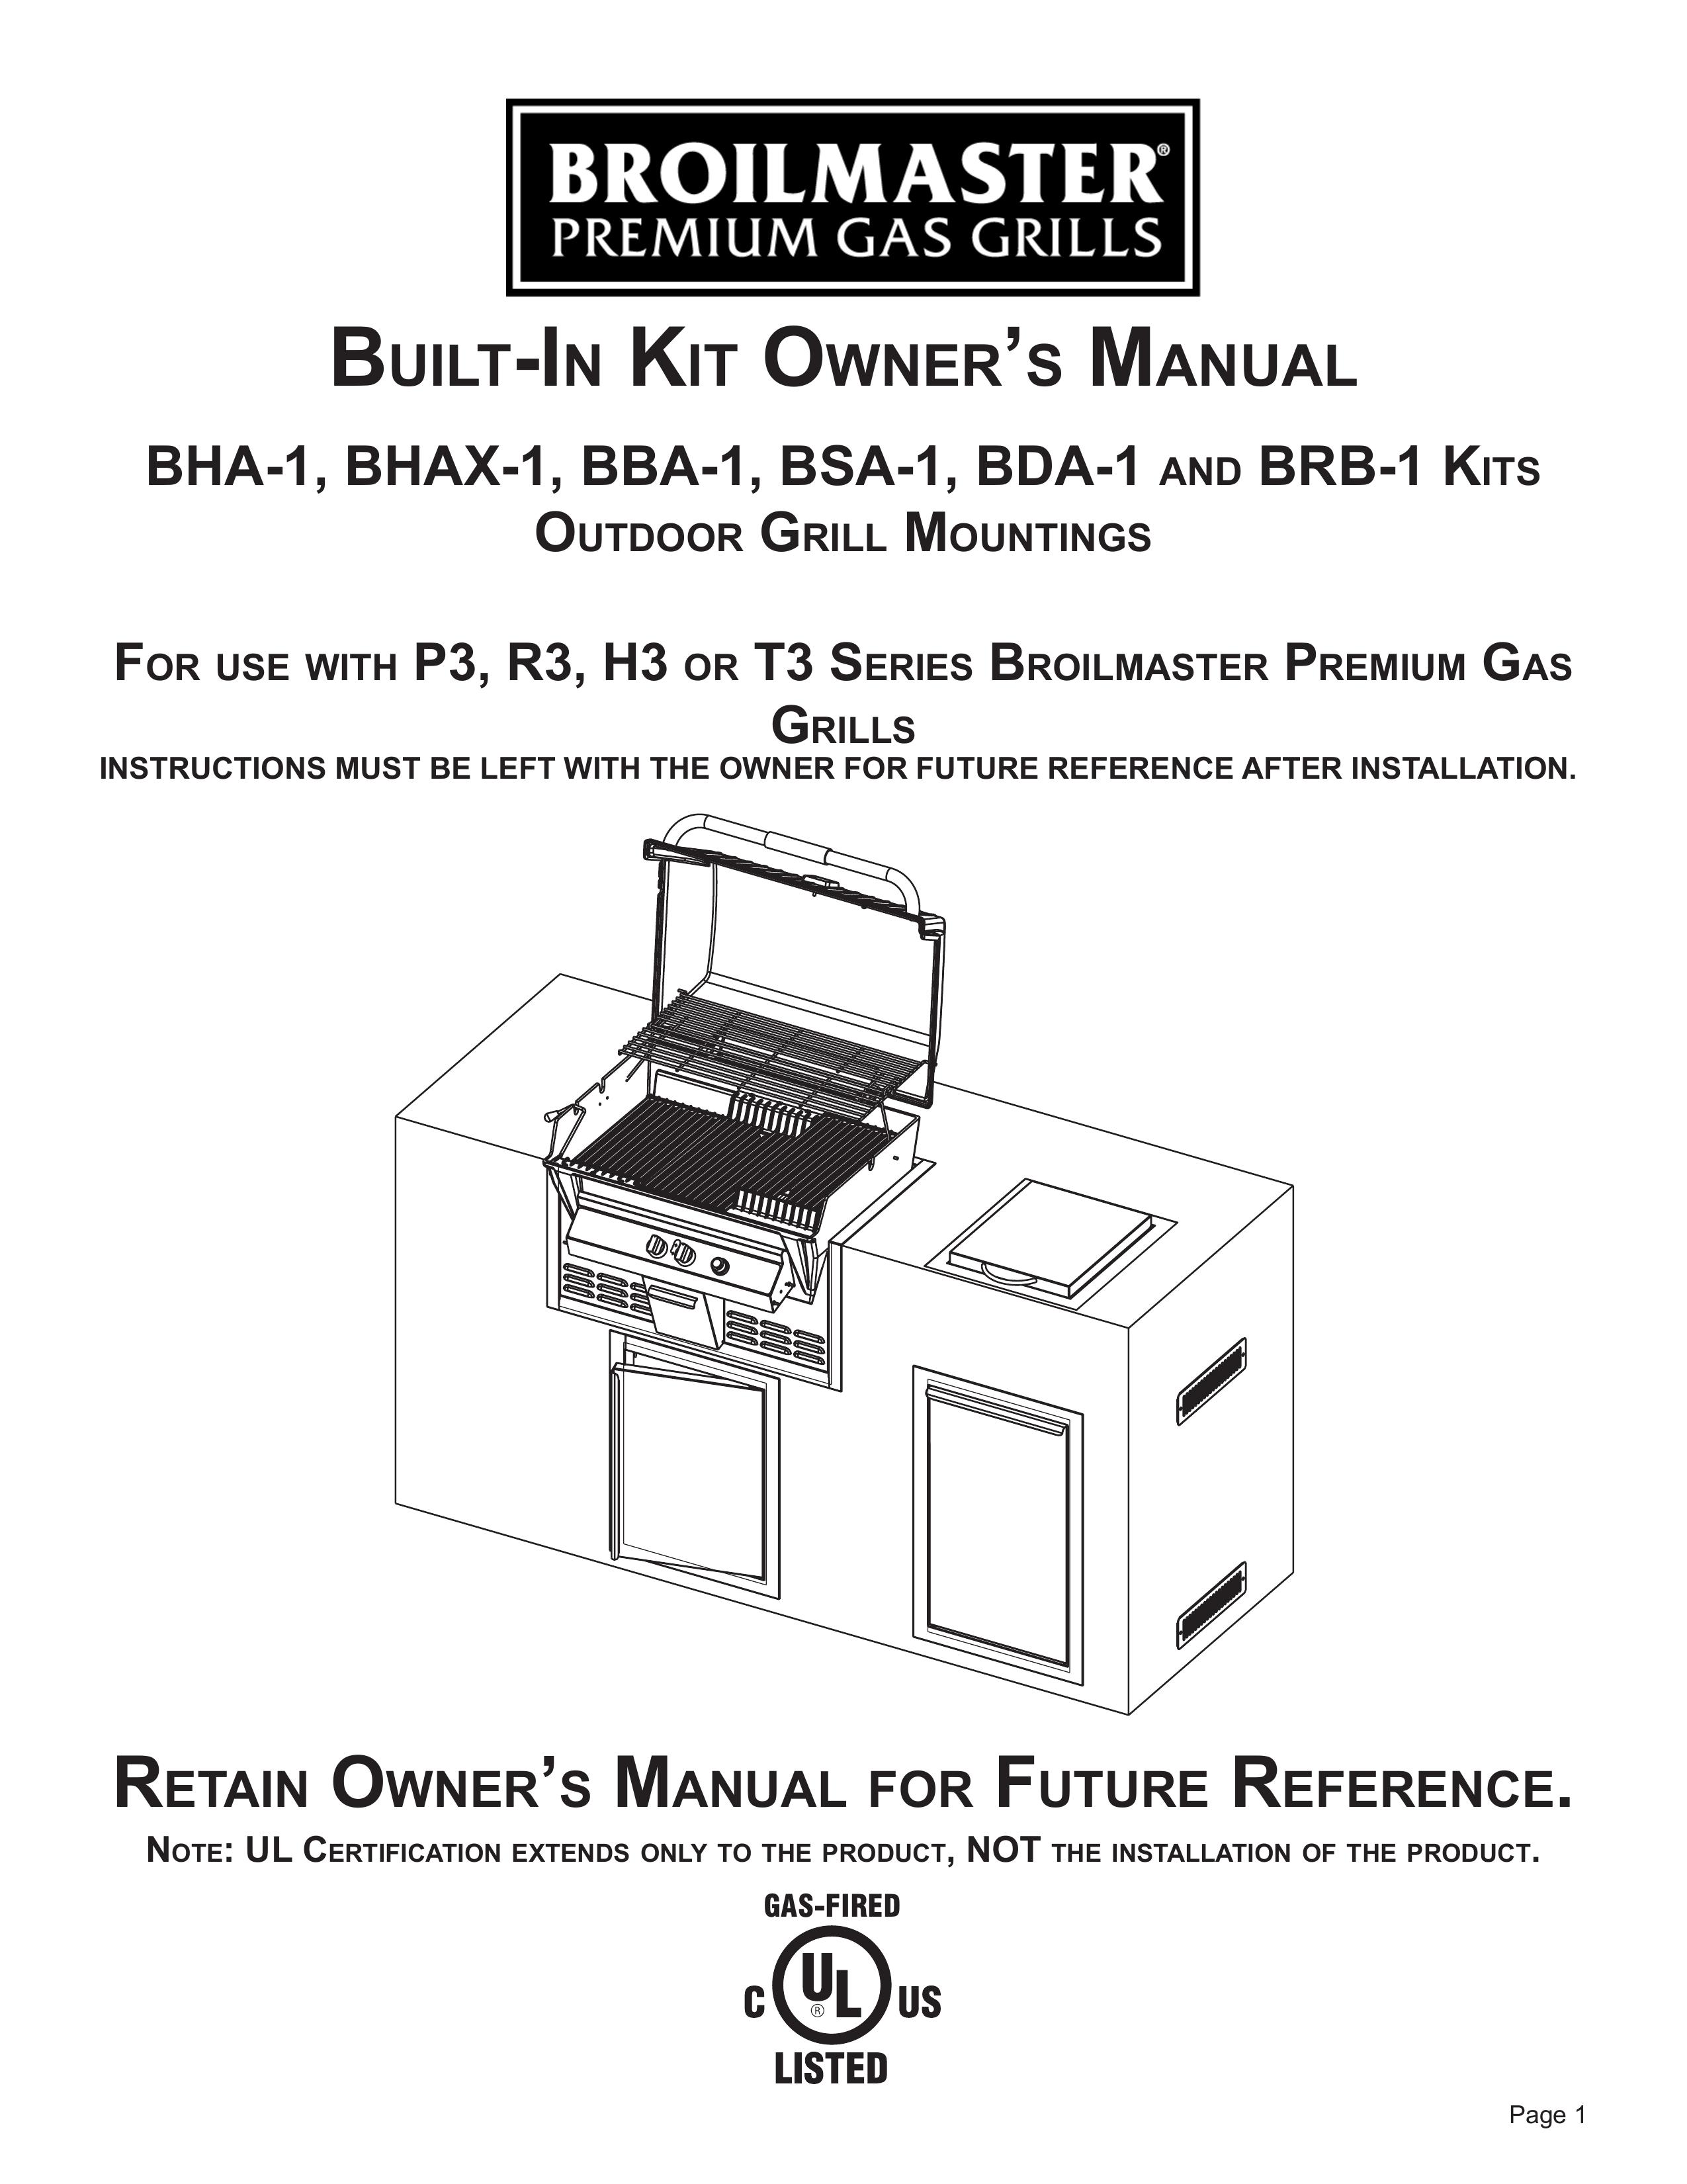 Broilmaster BBA-1 Gas Grill User Manual